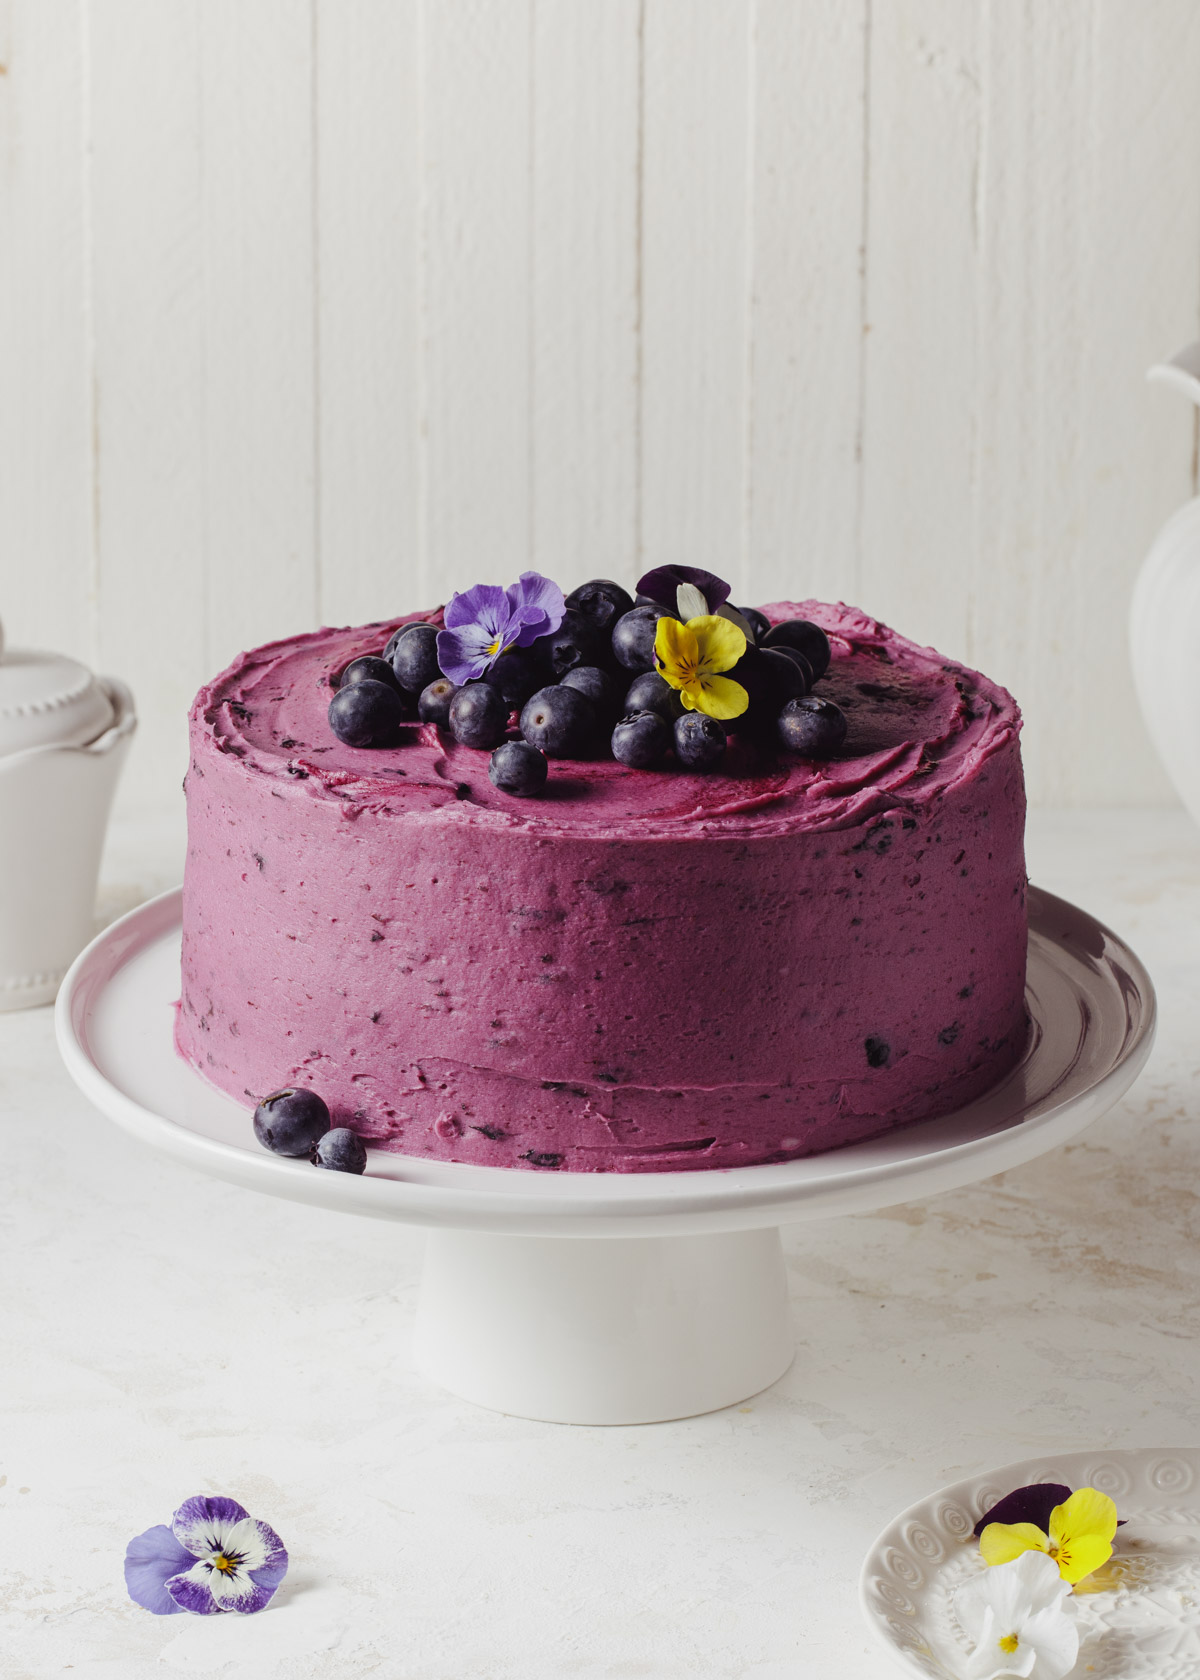 A purple buttercream blueberry chocolate cake with fresh blueberries on top set on a white cake stand